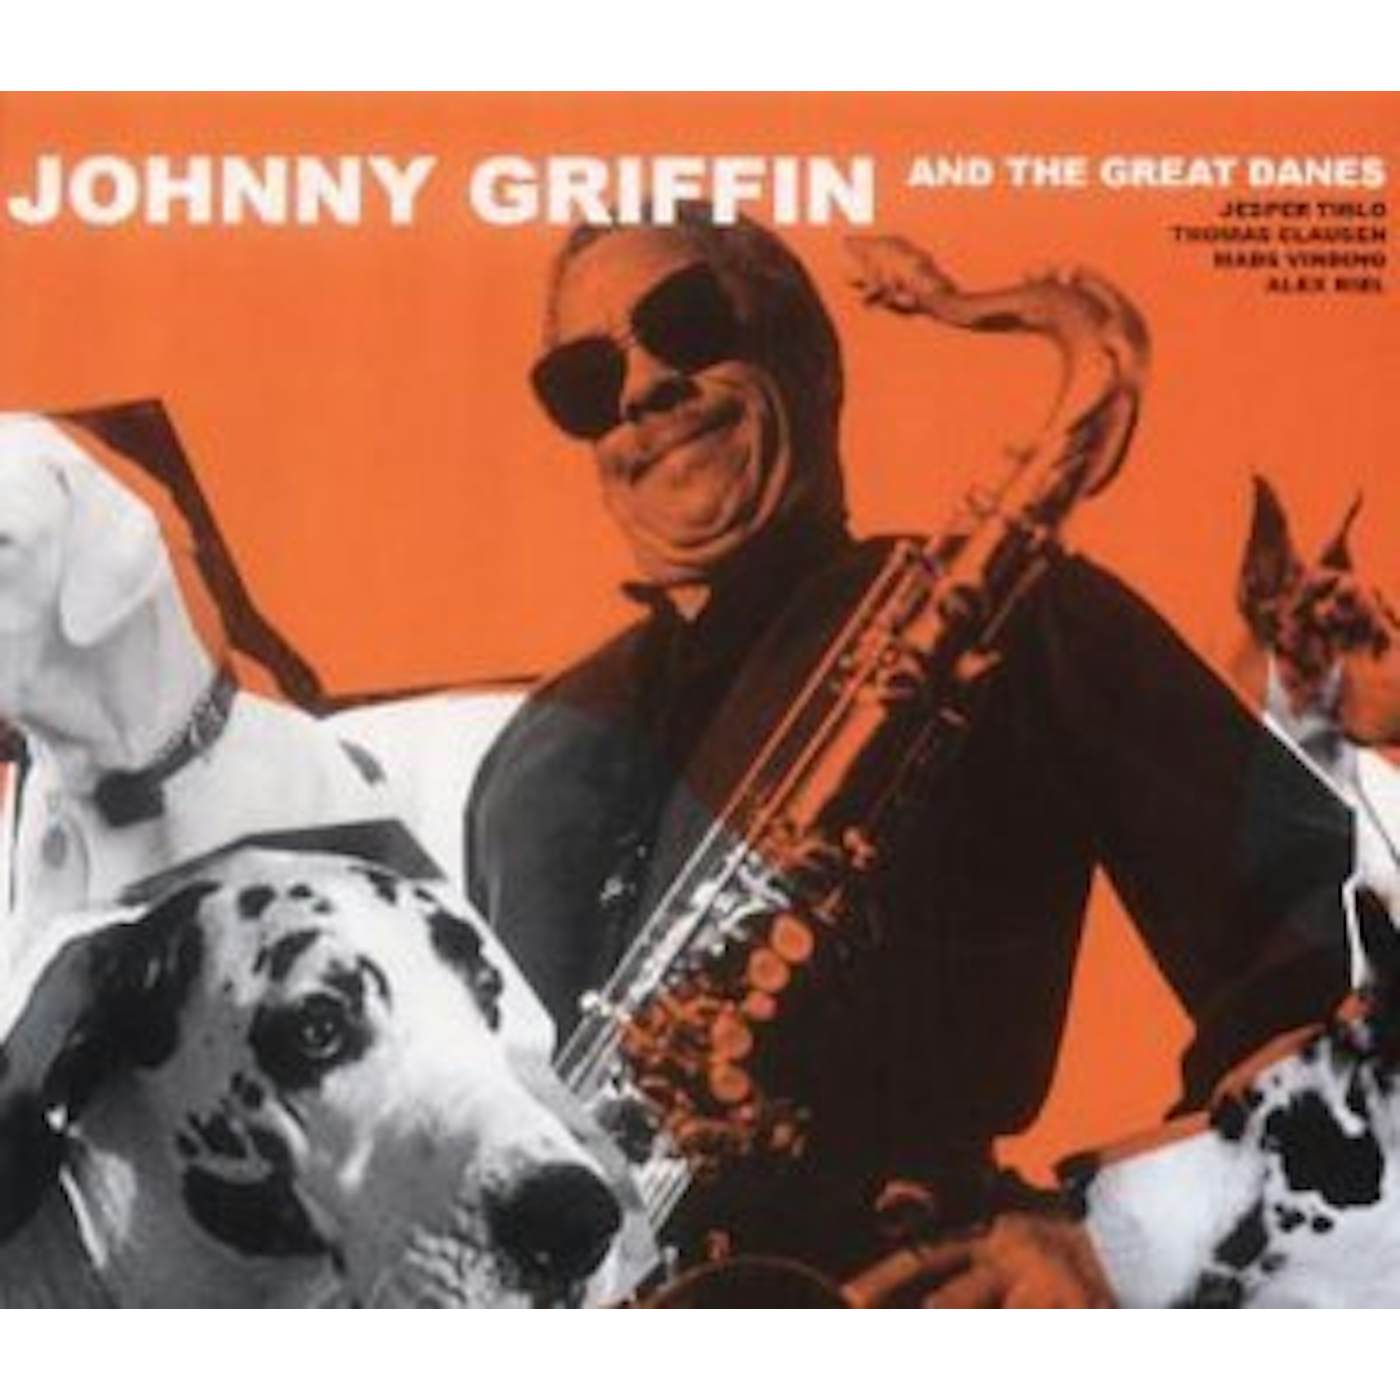 JOHNNY GRIFFIN AND THE GREAT DANES CD